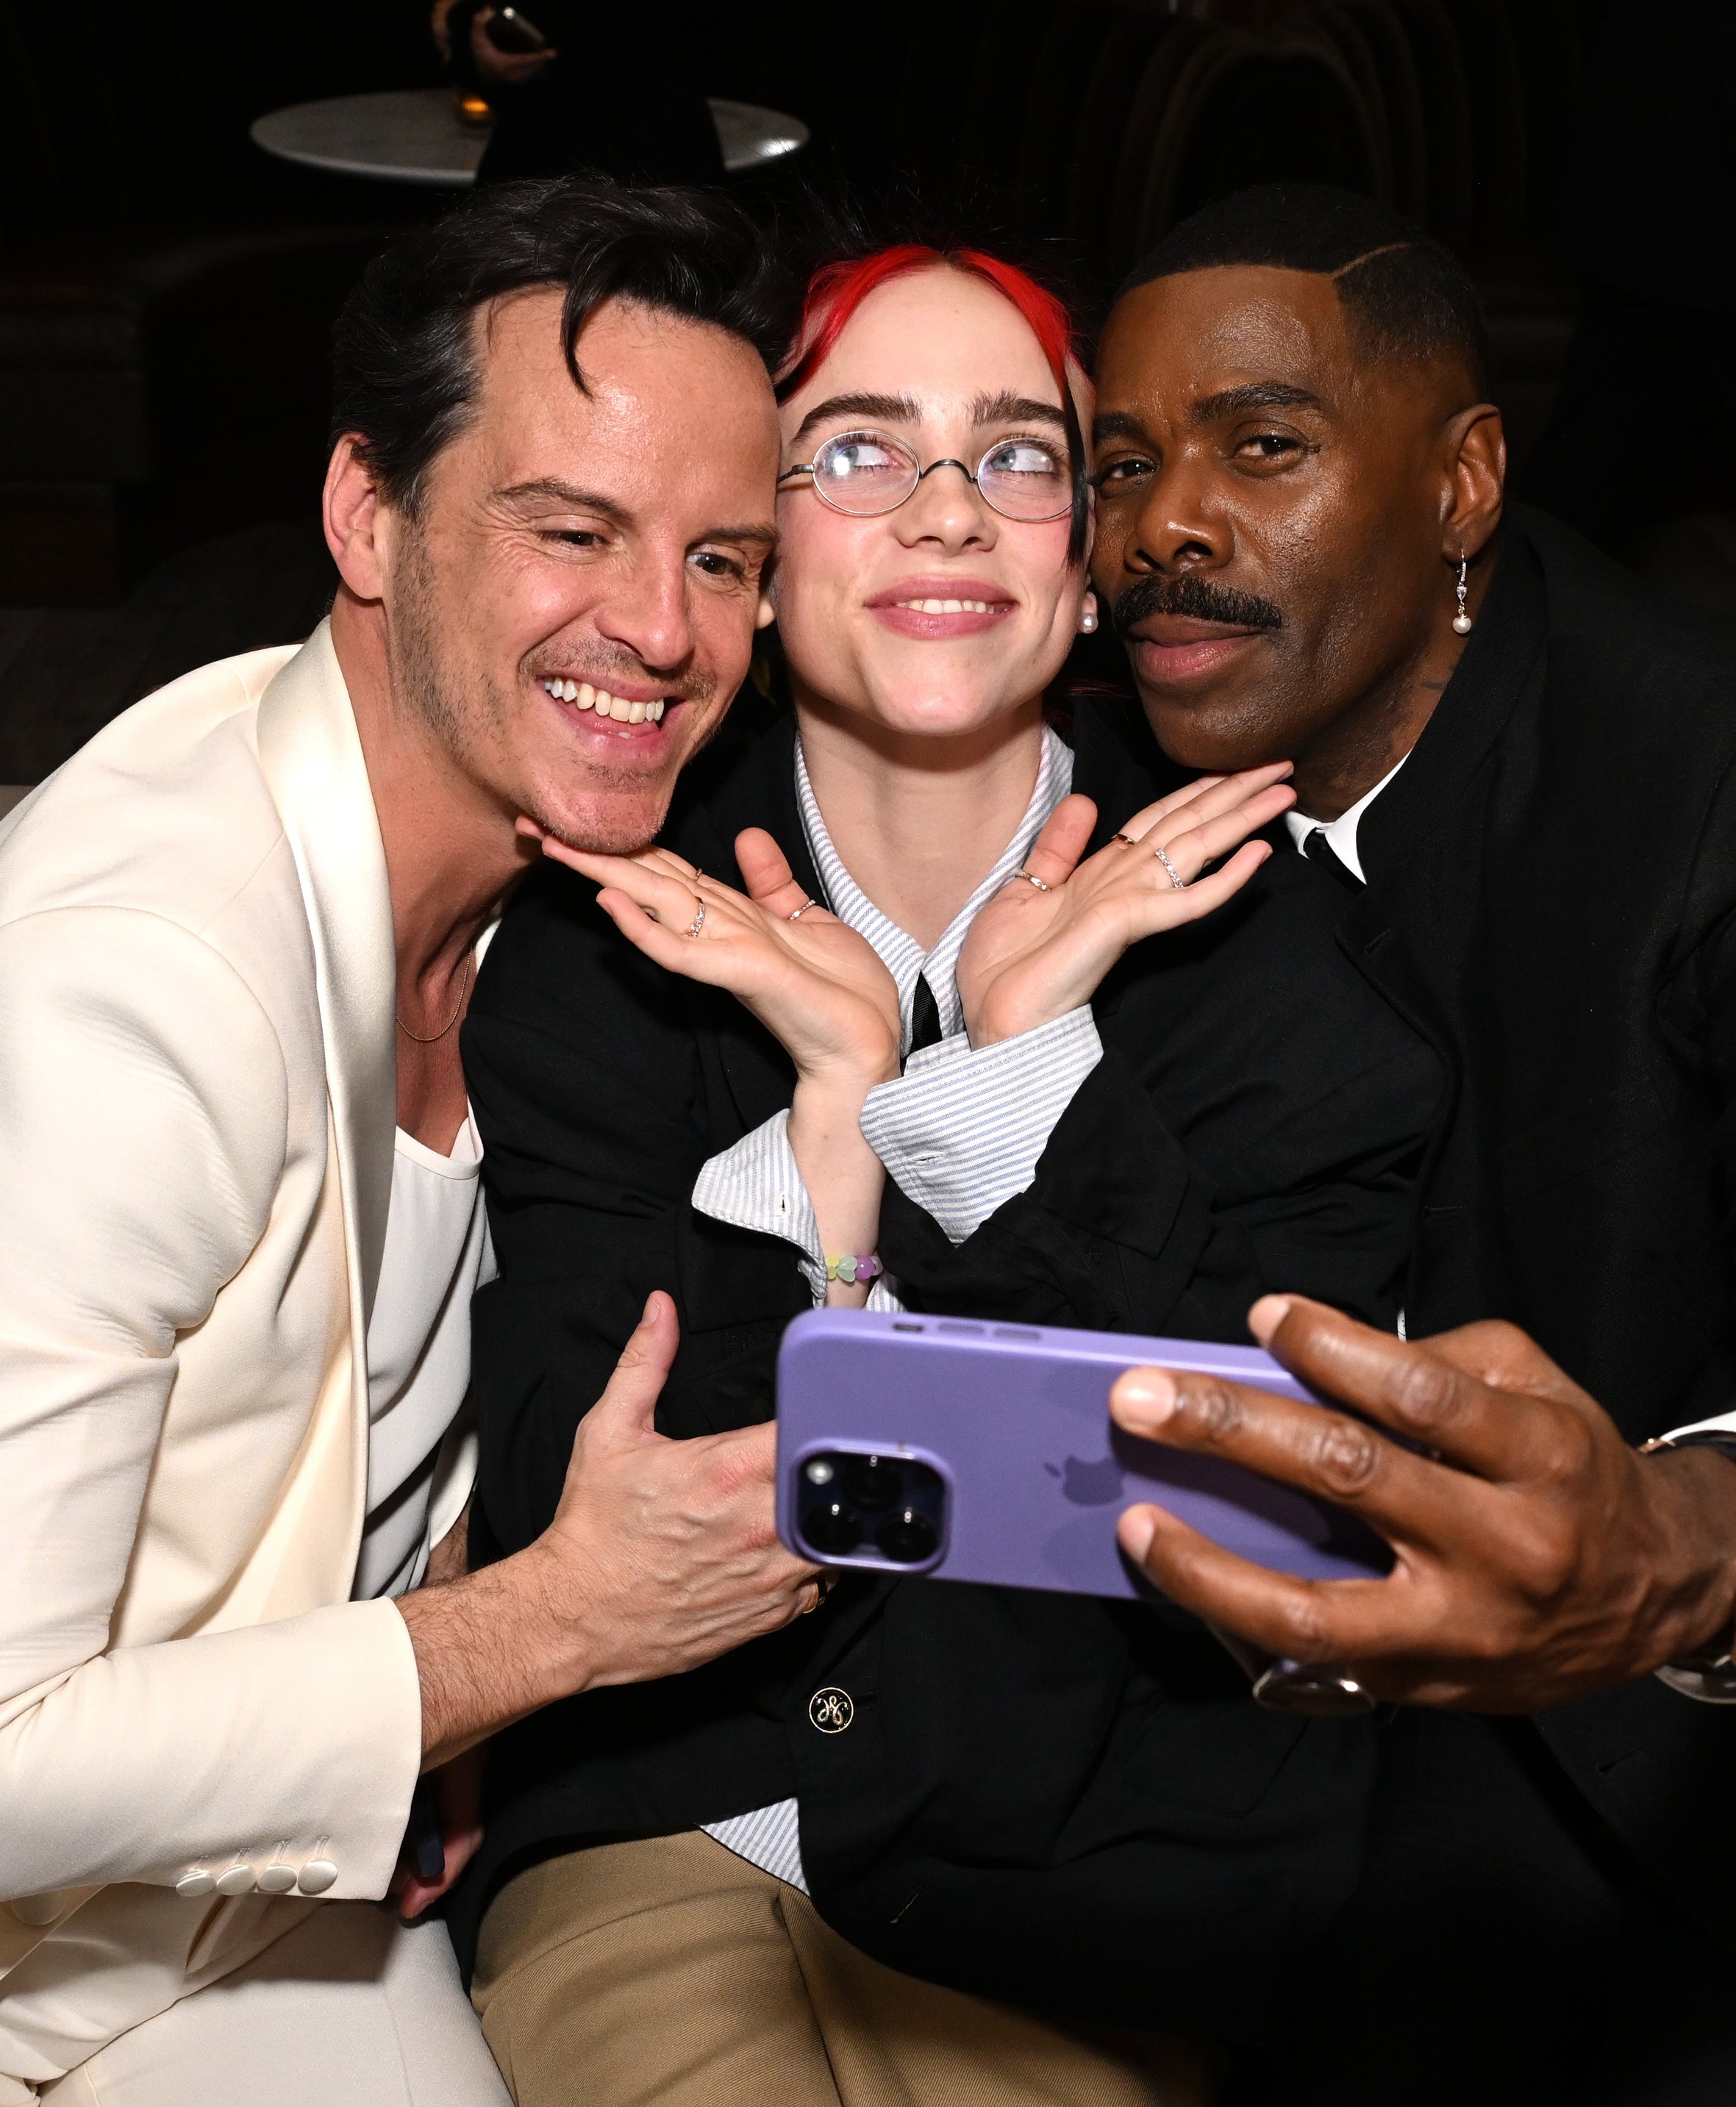 Billie playfully smiles as she sits in between Paul and Colman who is taking the selfie